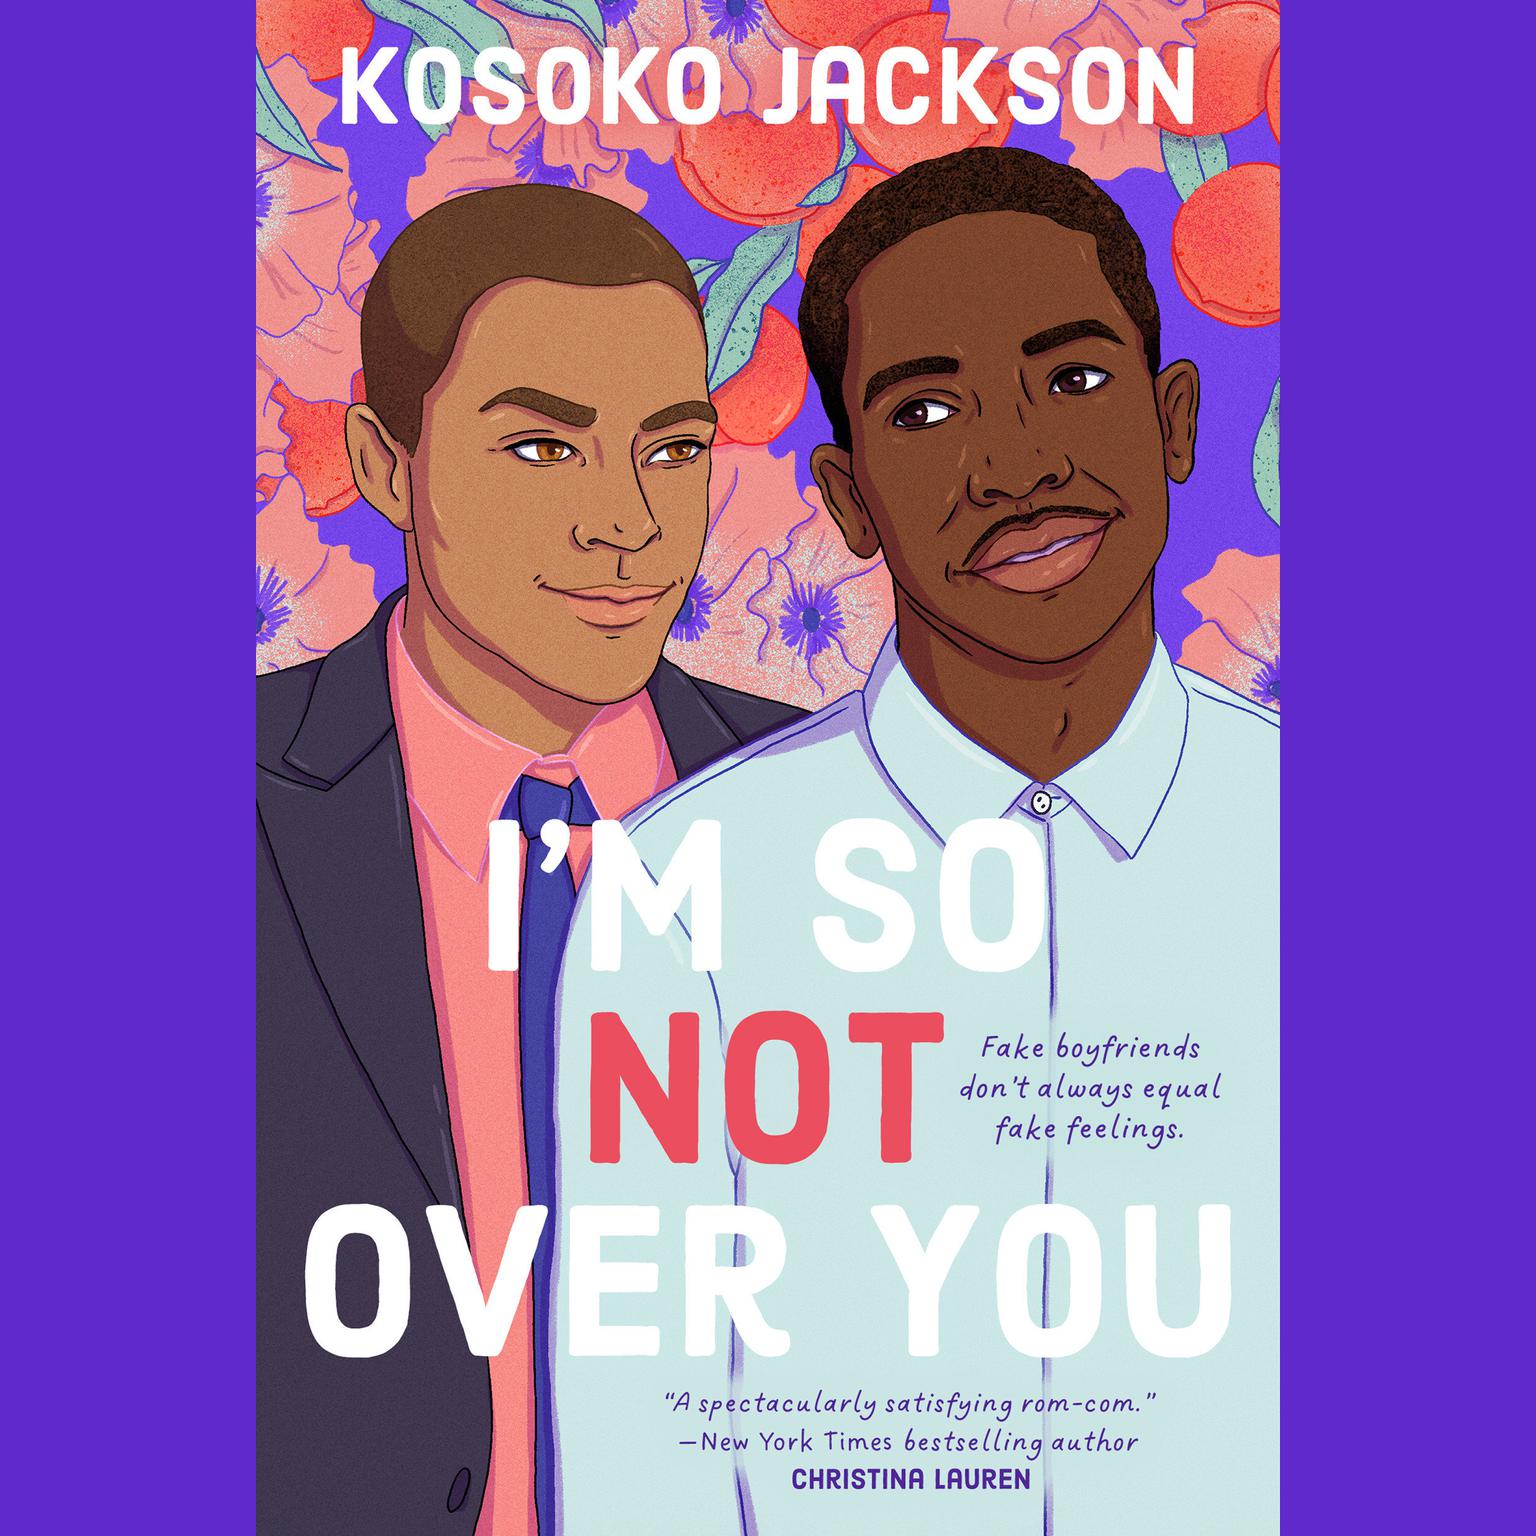 Im So (Not) Over You Audiobook, by Kosoko Jackson